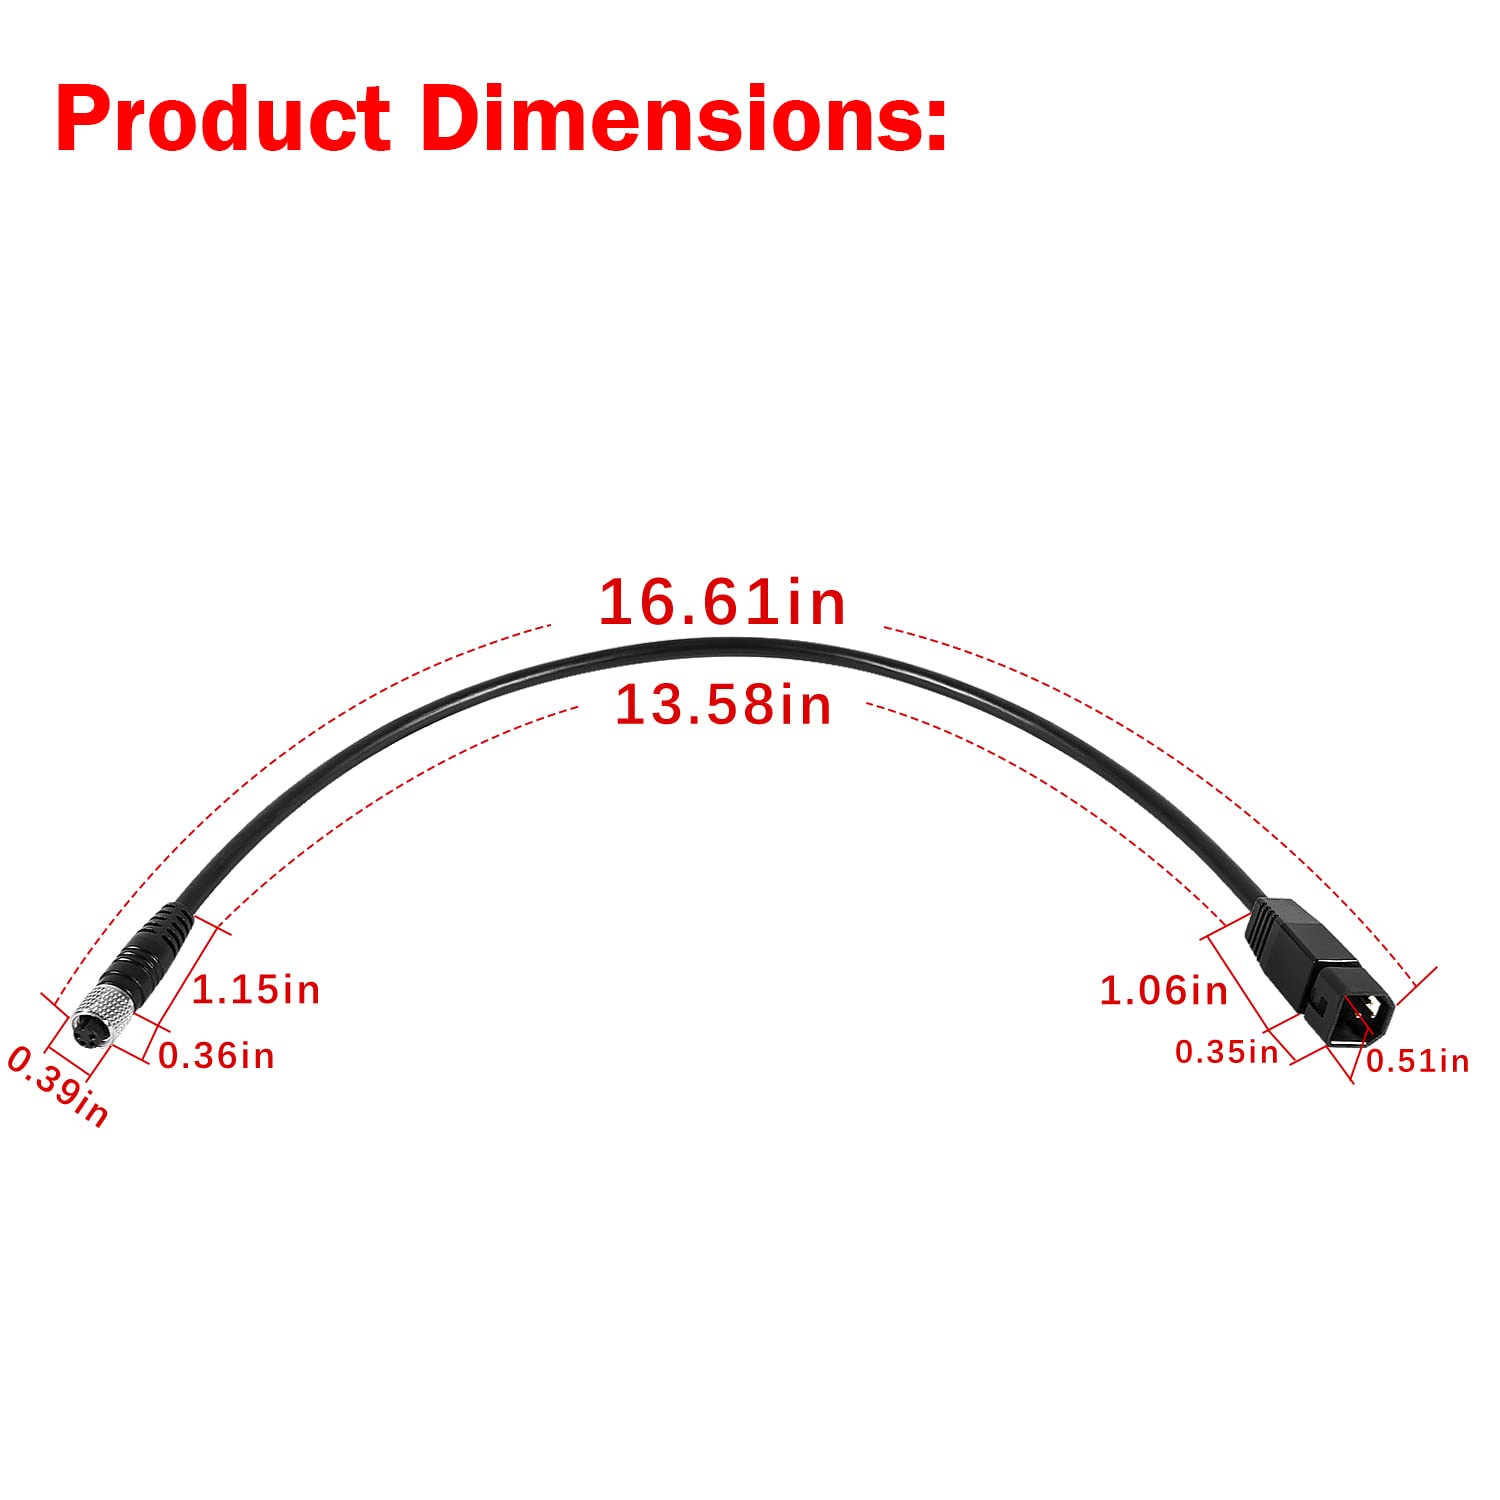 Deecaray 1852068 MKR-US2-8 HUM 7 PIN Transducer Adapter Cable with Instruction Manual，Suitable for Connection of Fish Finder to Universal Sonar 2 Transducer on Trolling Motor